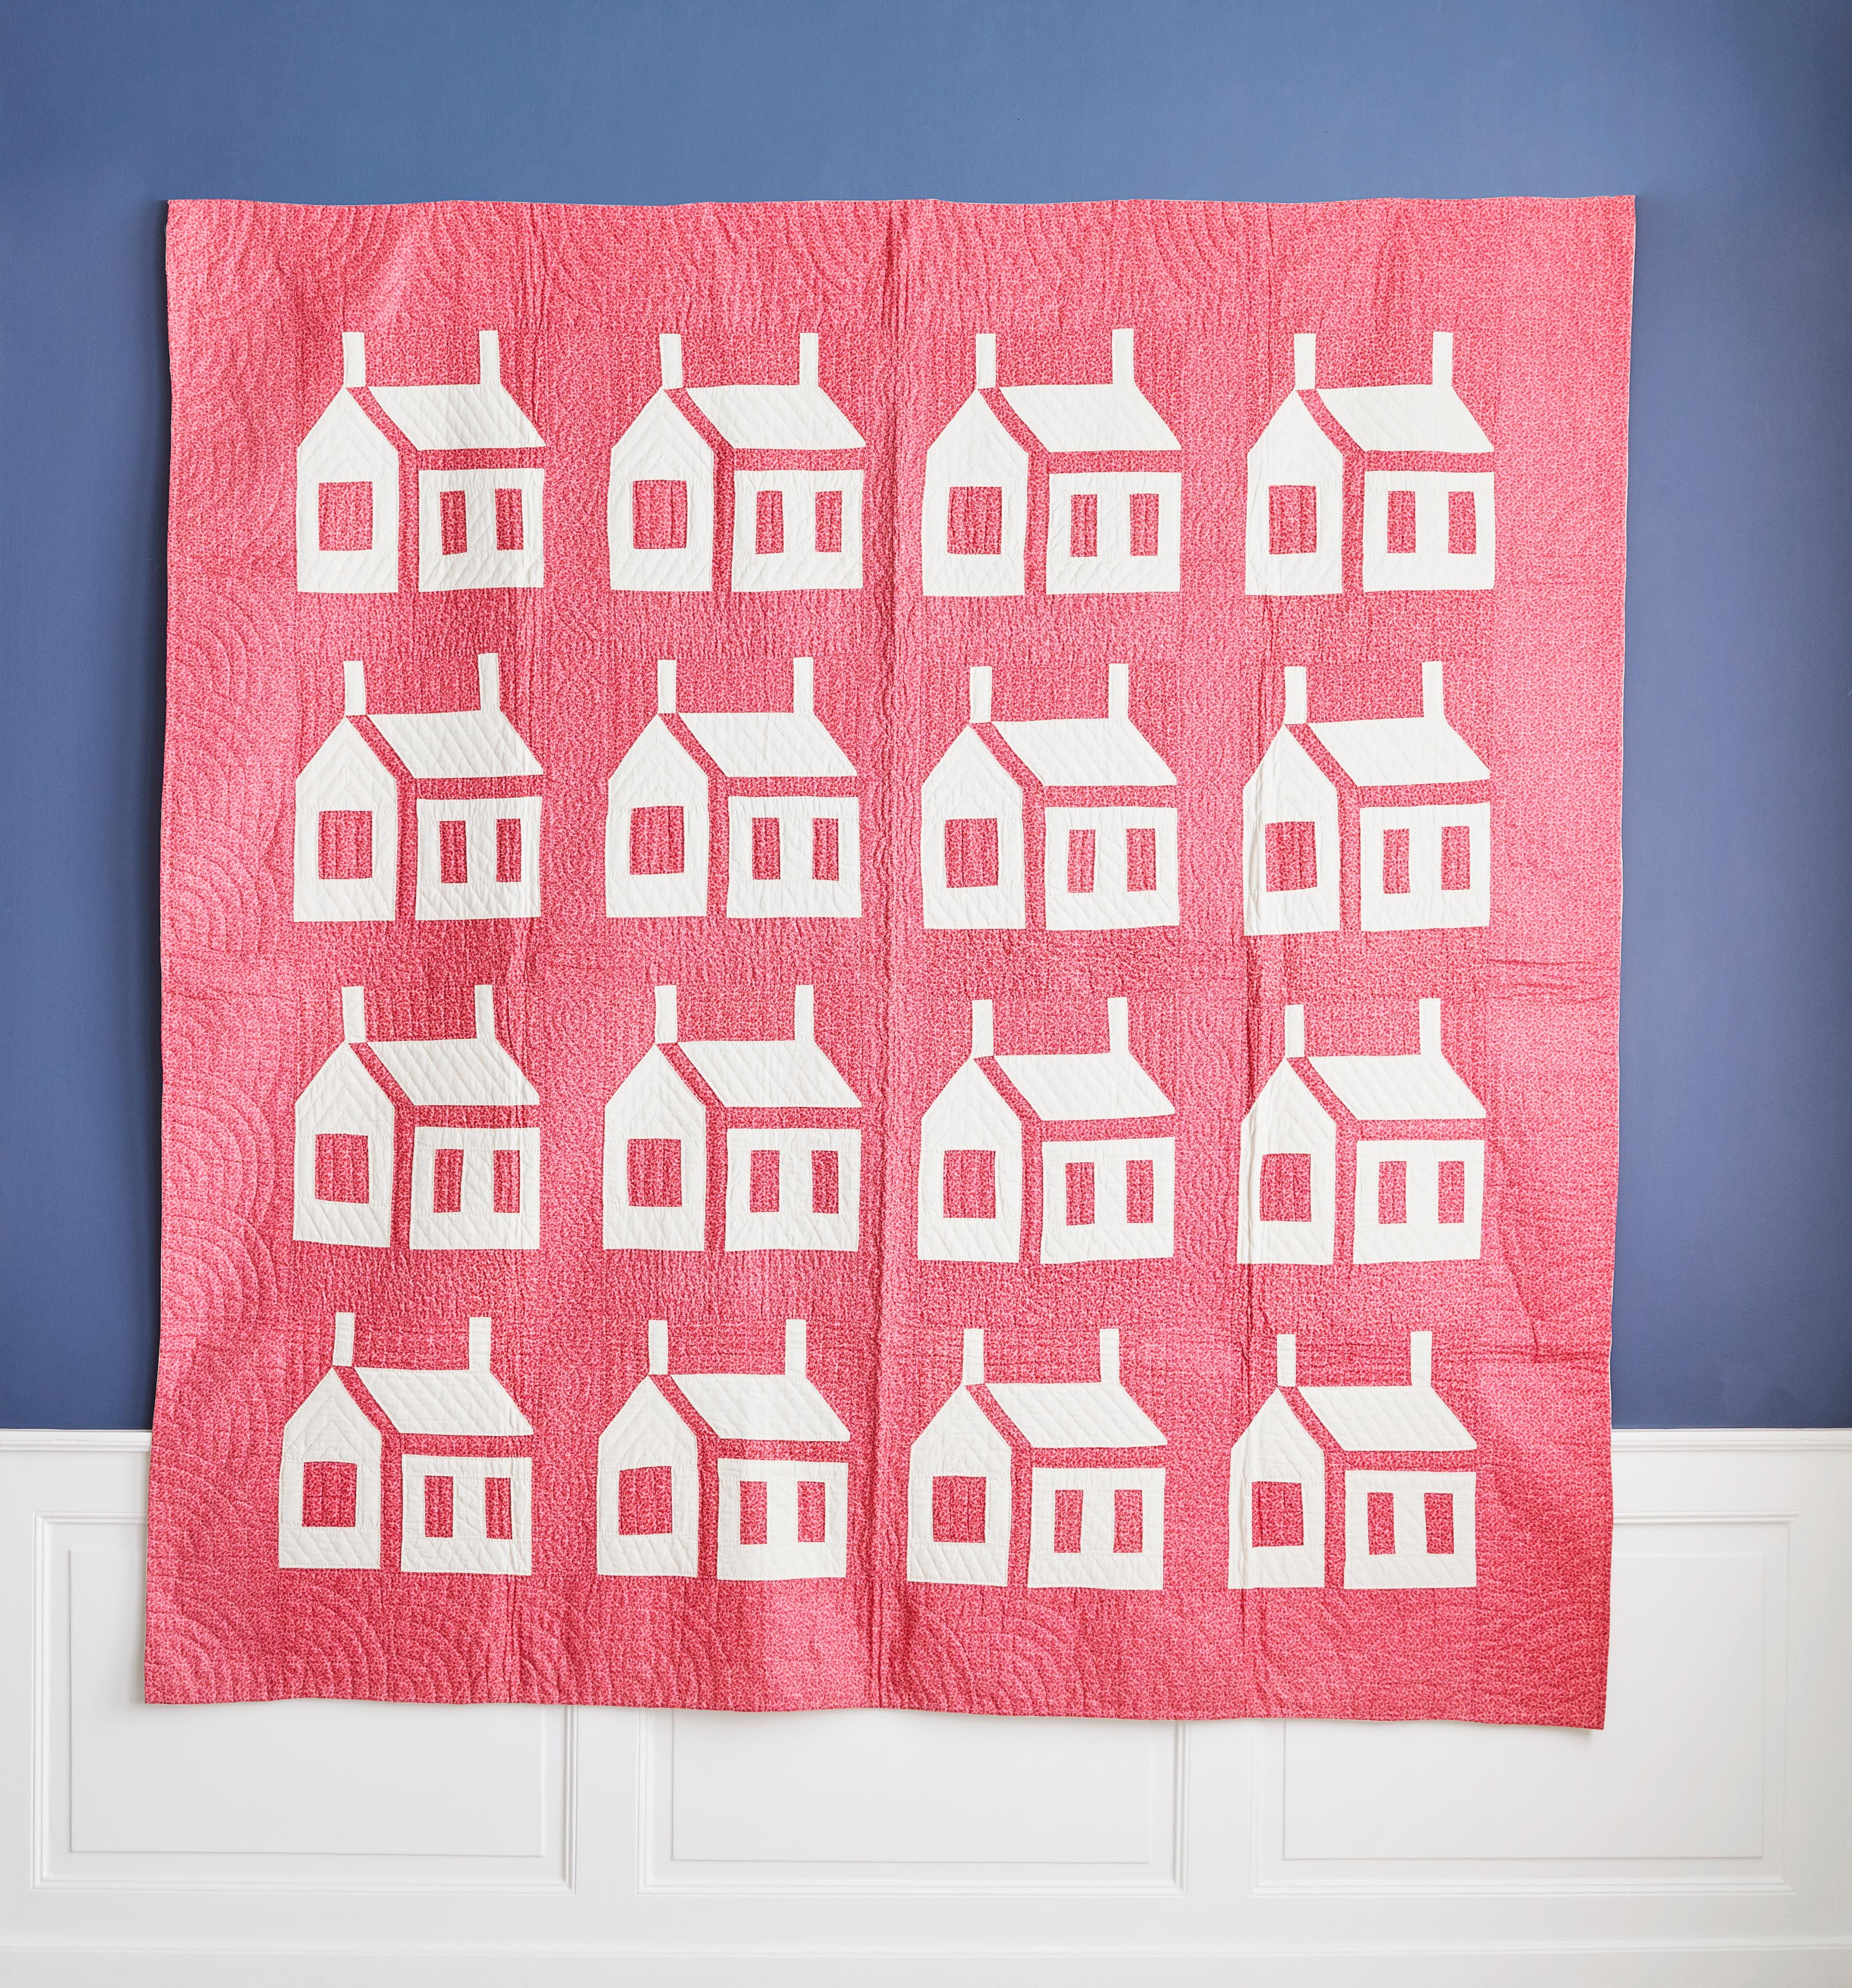 USA, vintage

Pink and white “Houses at night” patchwork quilt.

Measures: H 208 x W 200 cm.

